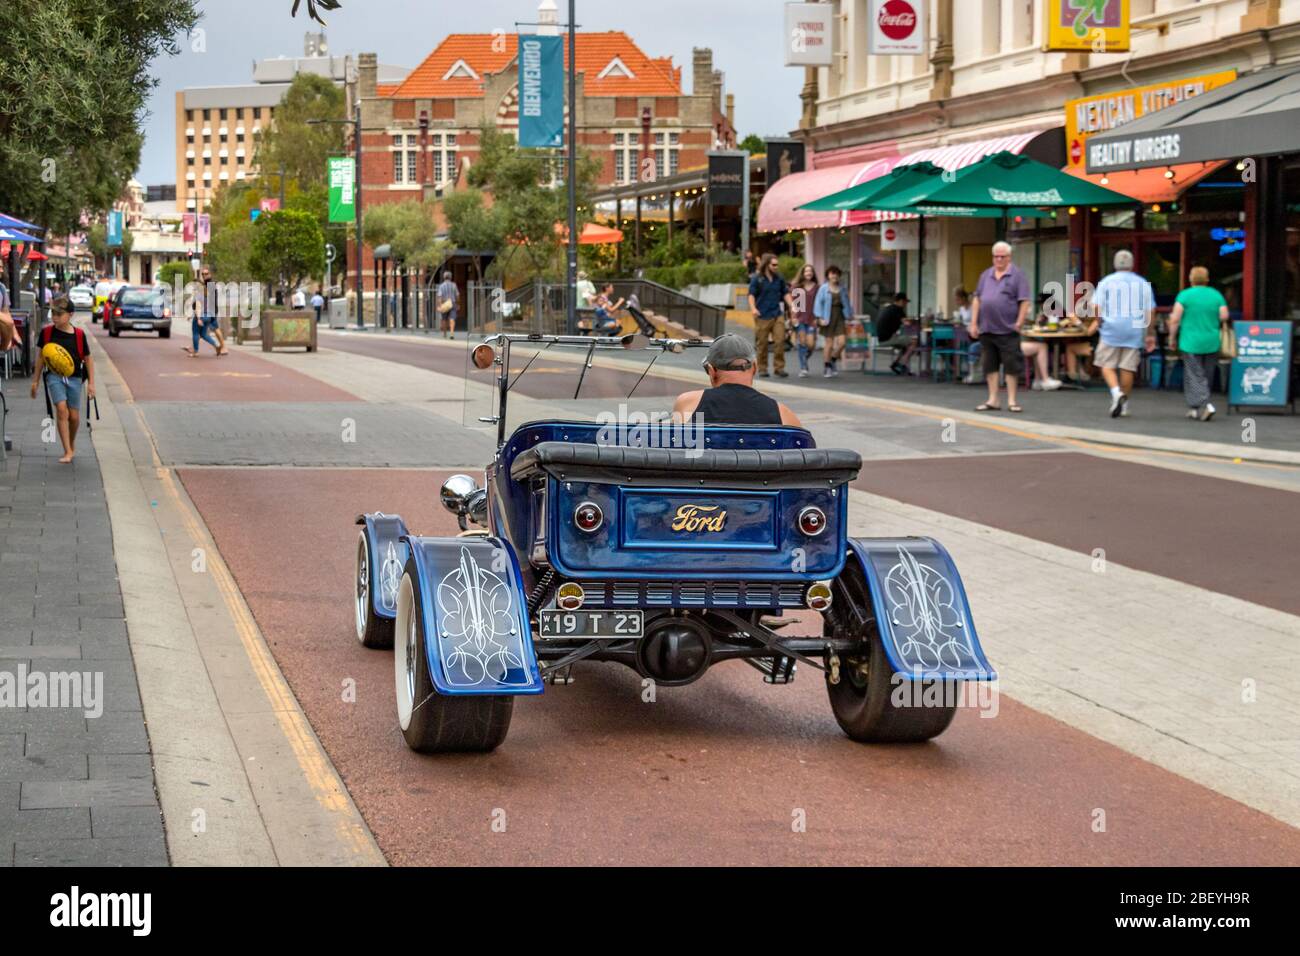 An old vintage Ford car on the South Terrace street at the city center of Fremantle, Australia. Stock Photo